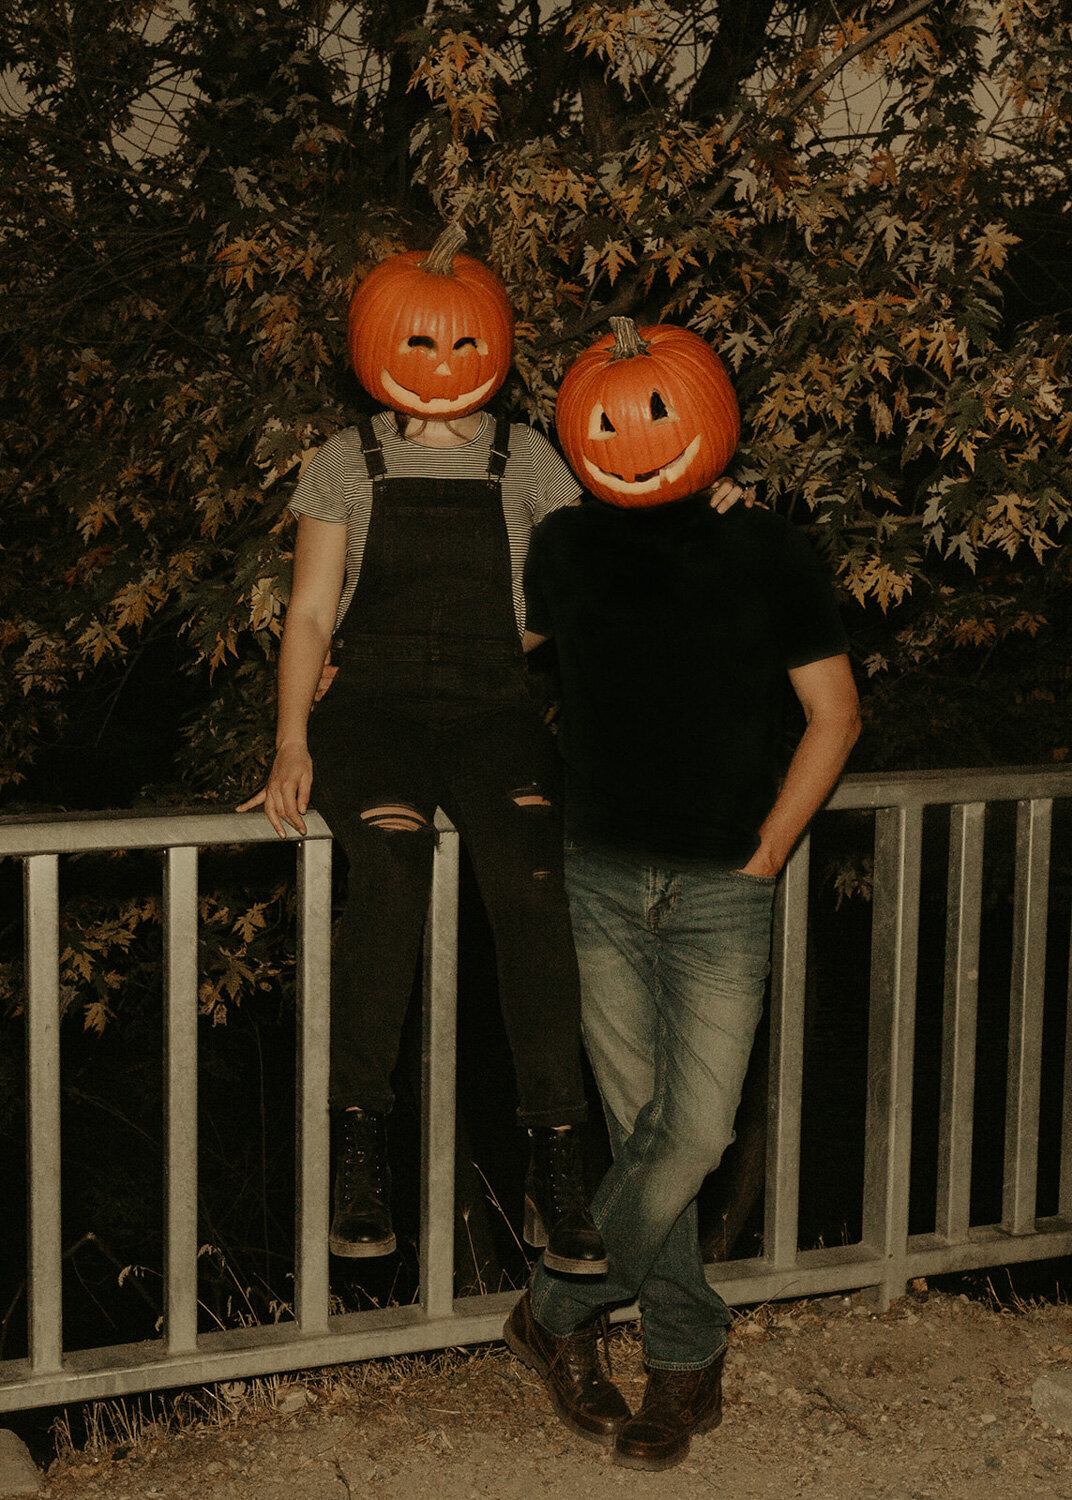 Couple wearing a pumpkin head while the man standing behind the railings and the woman sitting on the railings